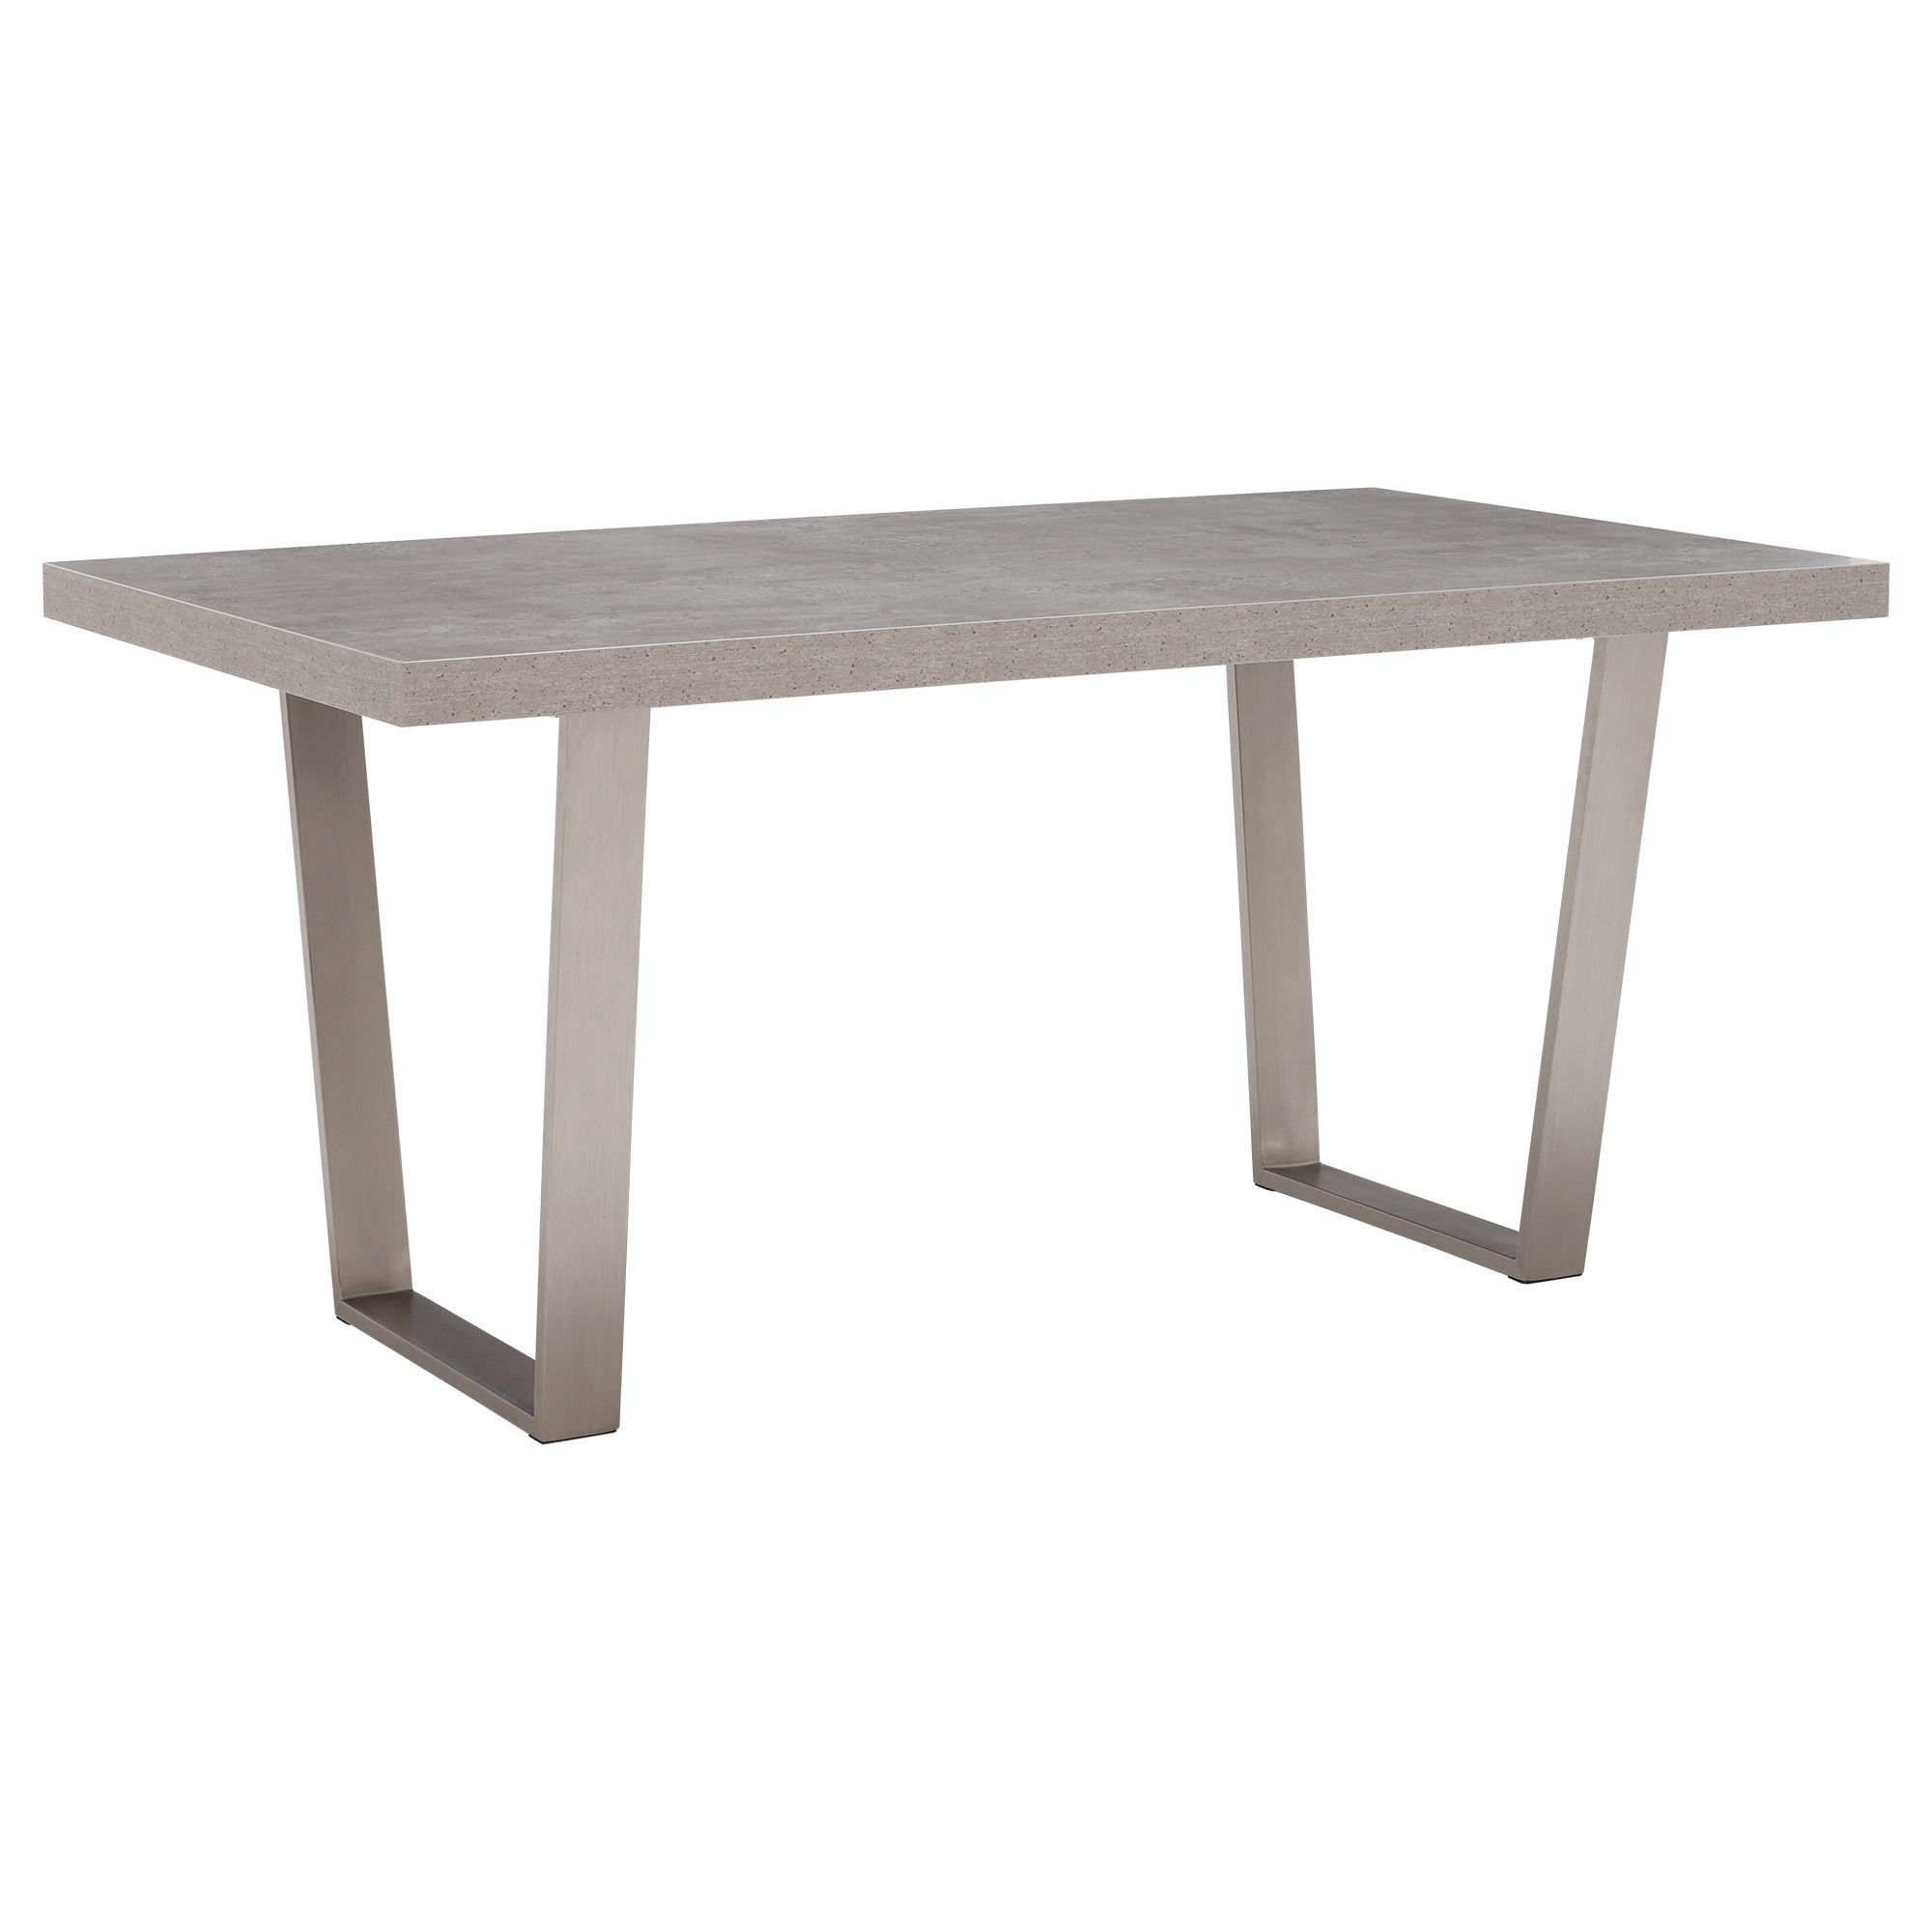 Halmstad Dining Table, Concrete | Tables | Dining Room With 2017 Nutter 3 Piece Dining Sets (View 15 of 20)